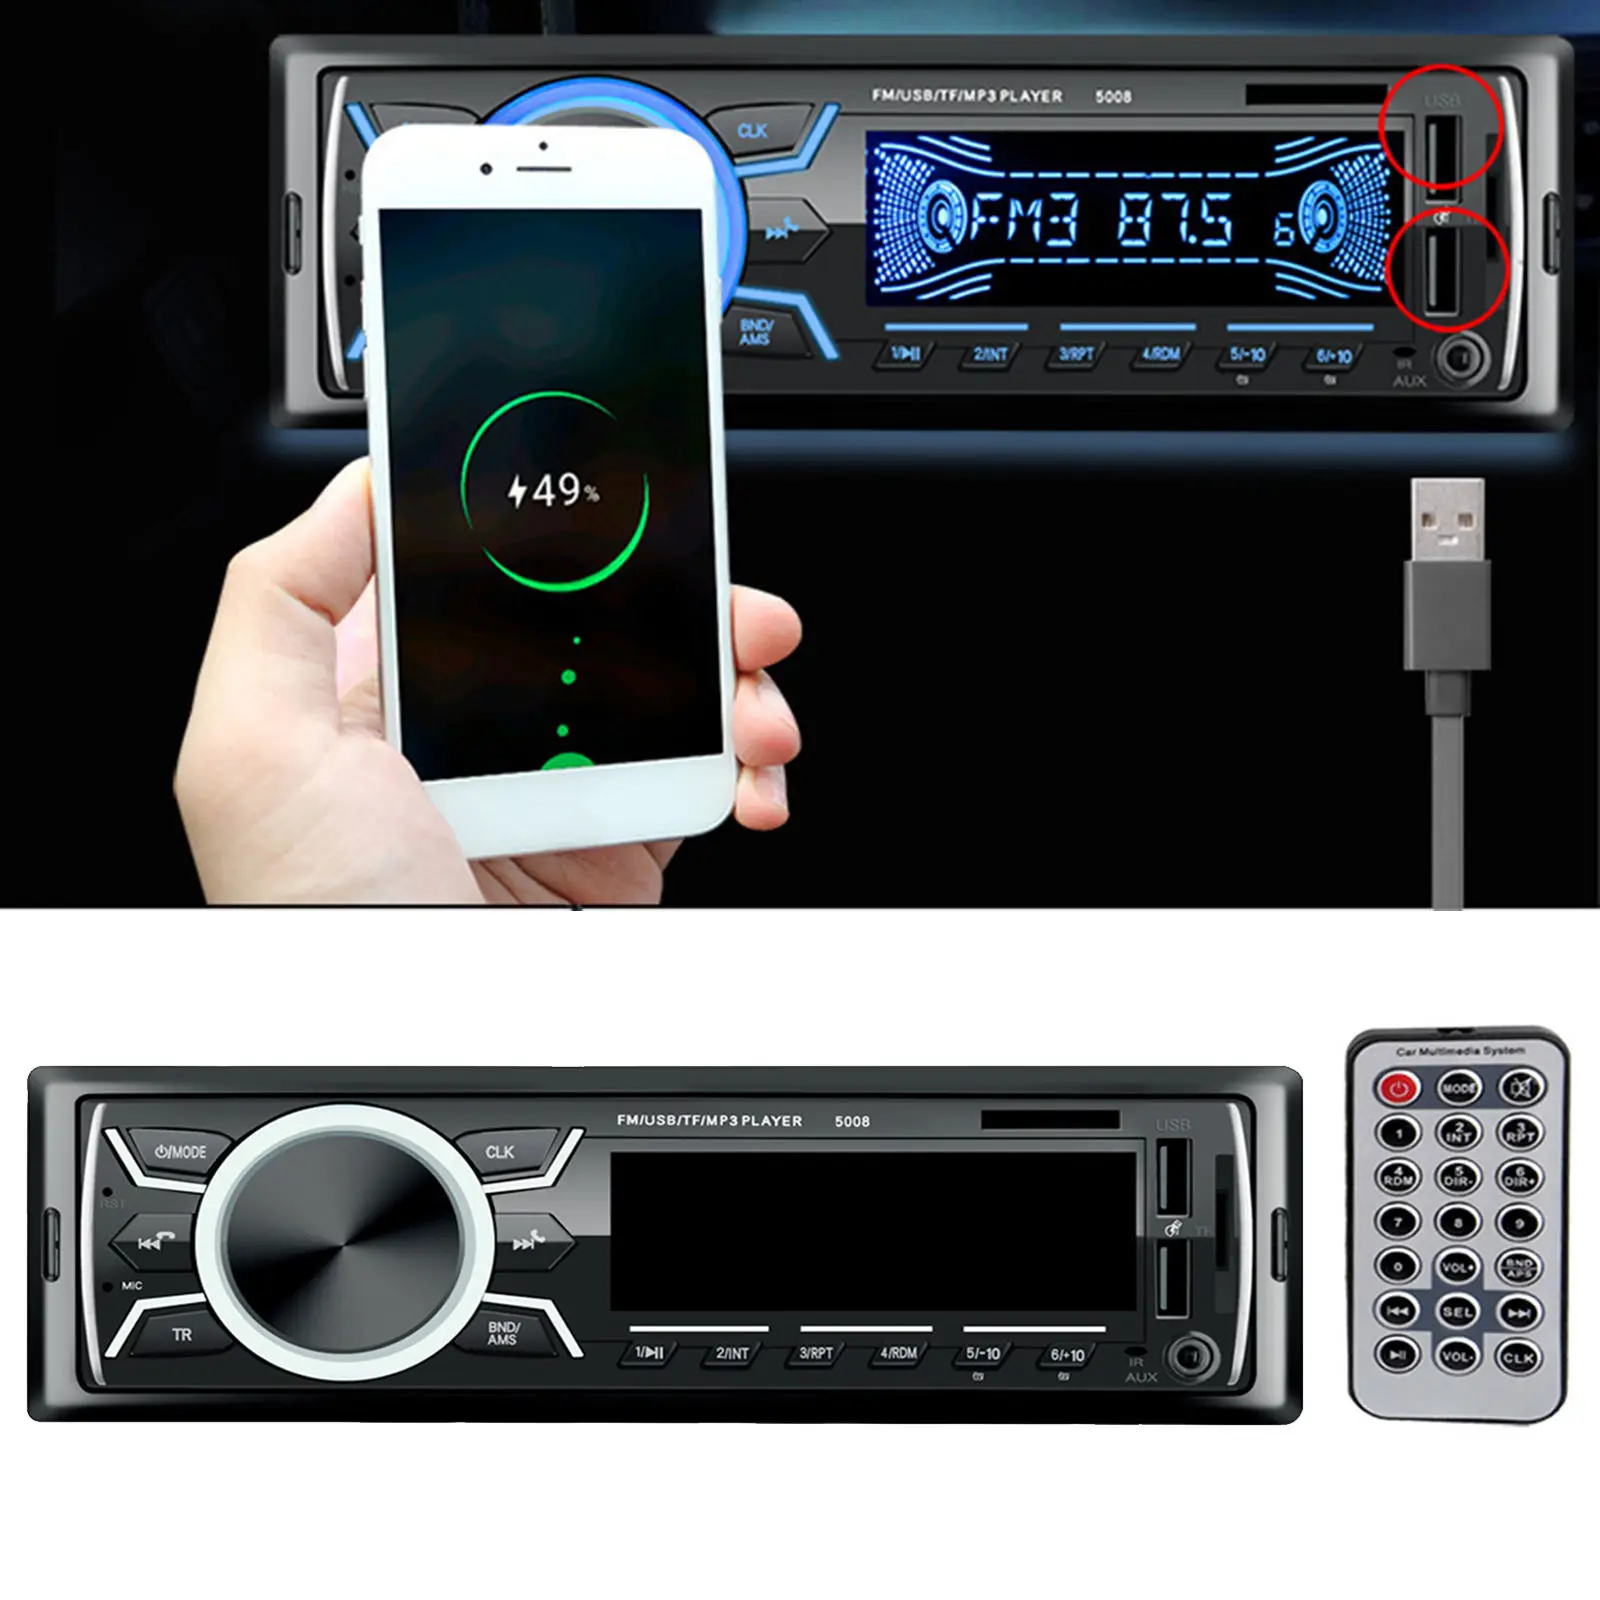 Multimedia 1 DIN 12V Car Stereo Hands-Free Calling Built-in Mic Radio Receiver Wireless Remote Control Fast Charging Dual USB